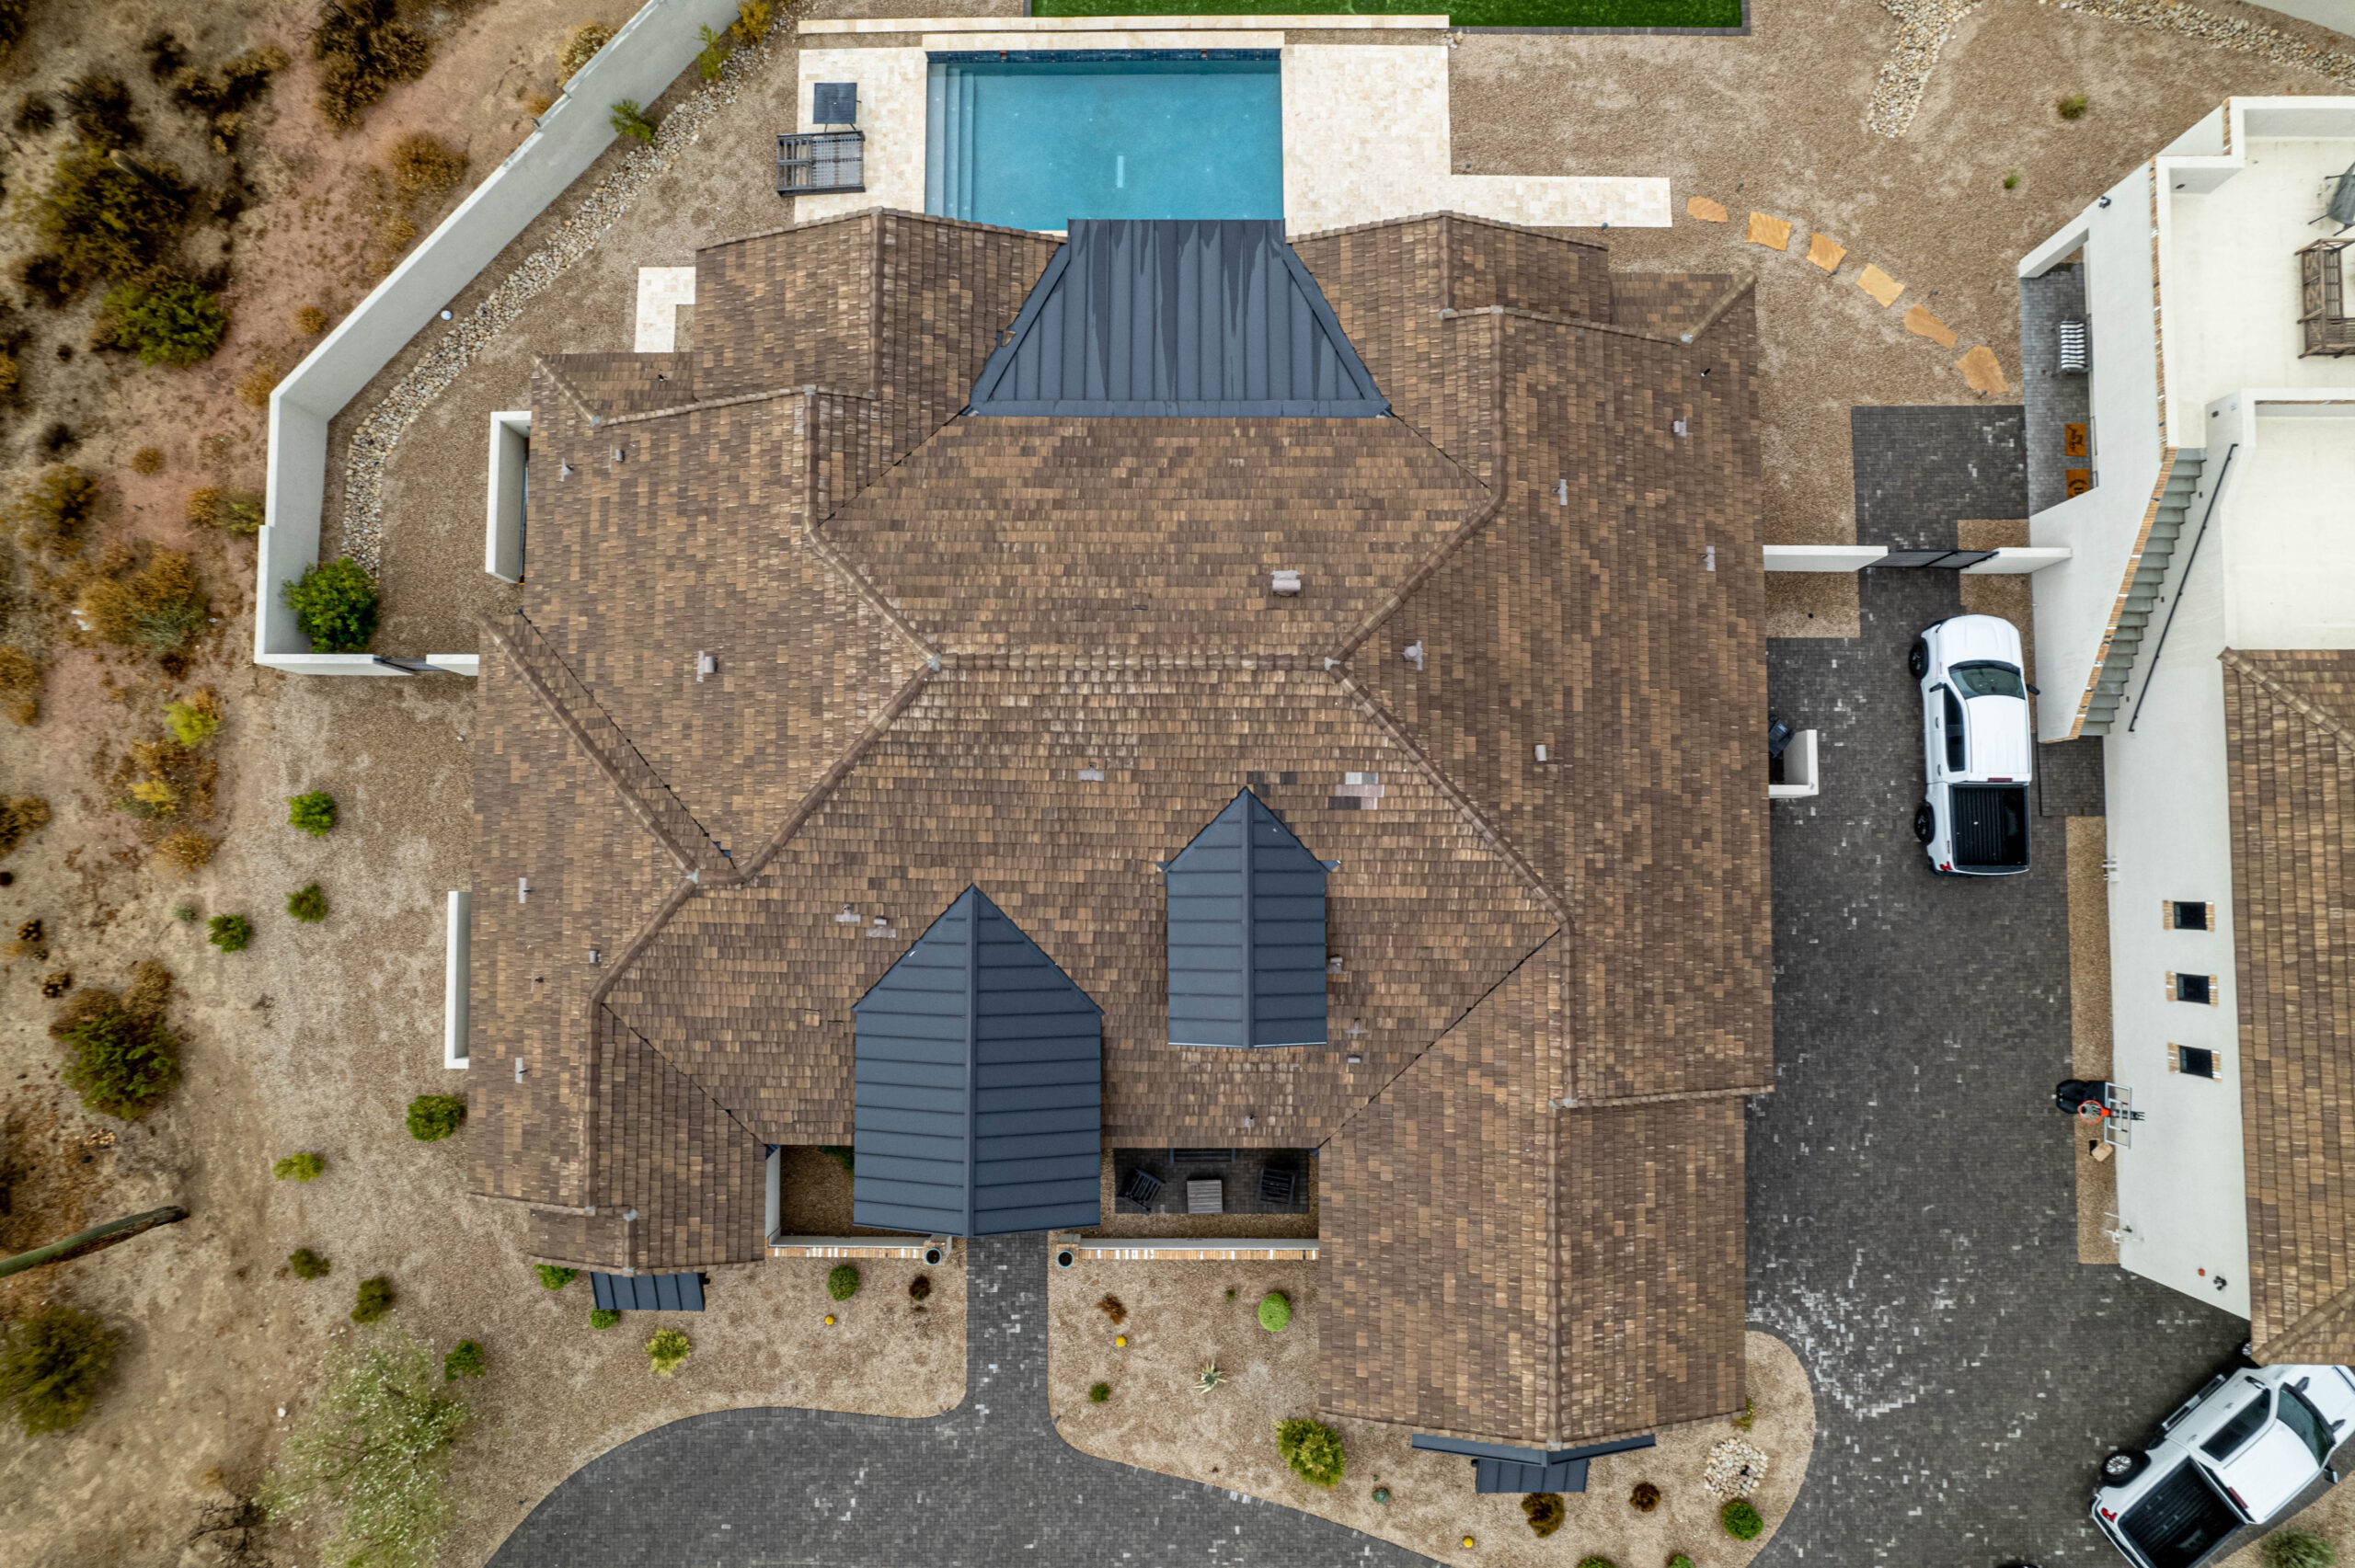 Aerial view of a Mesa neighborhood featuring a house with repaired tile roof.